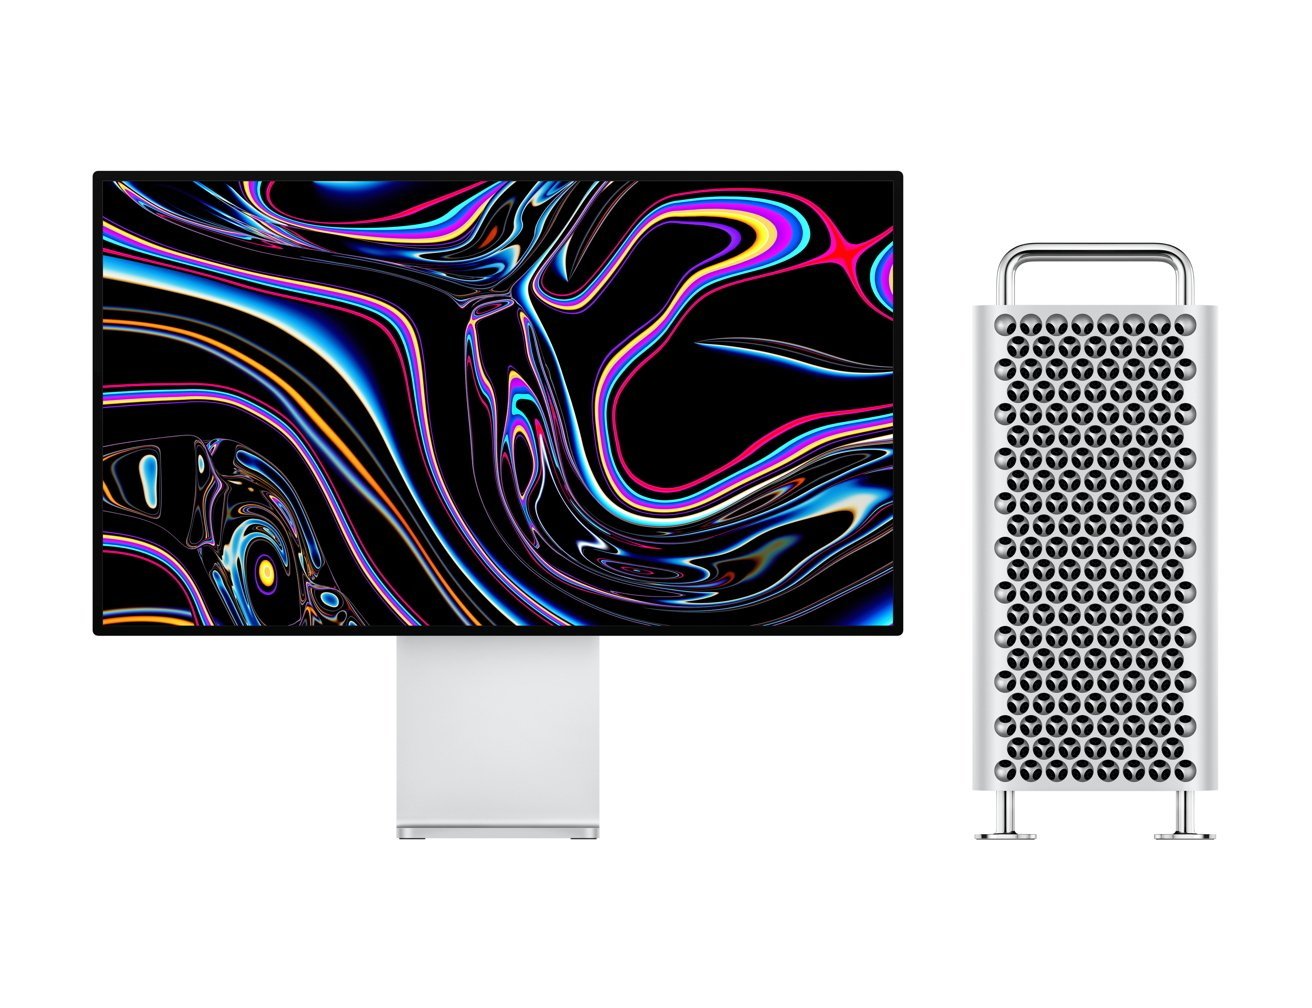 Specifications-wise, the Mac Pro is effectively a Mac Studio that's $3,000 more expensive and with PCIe expansion. 